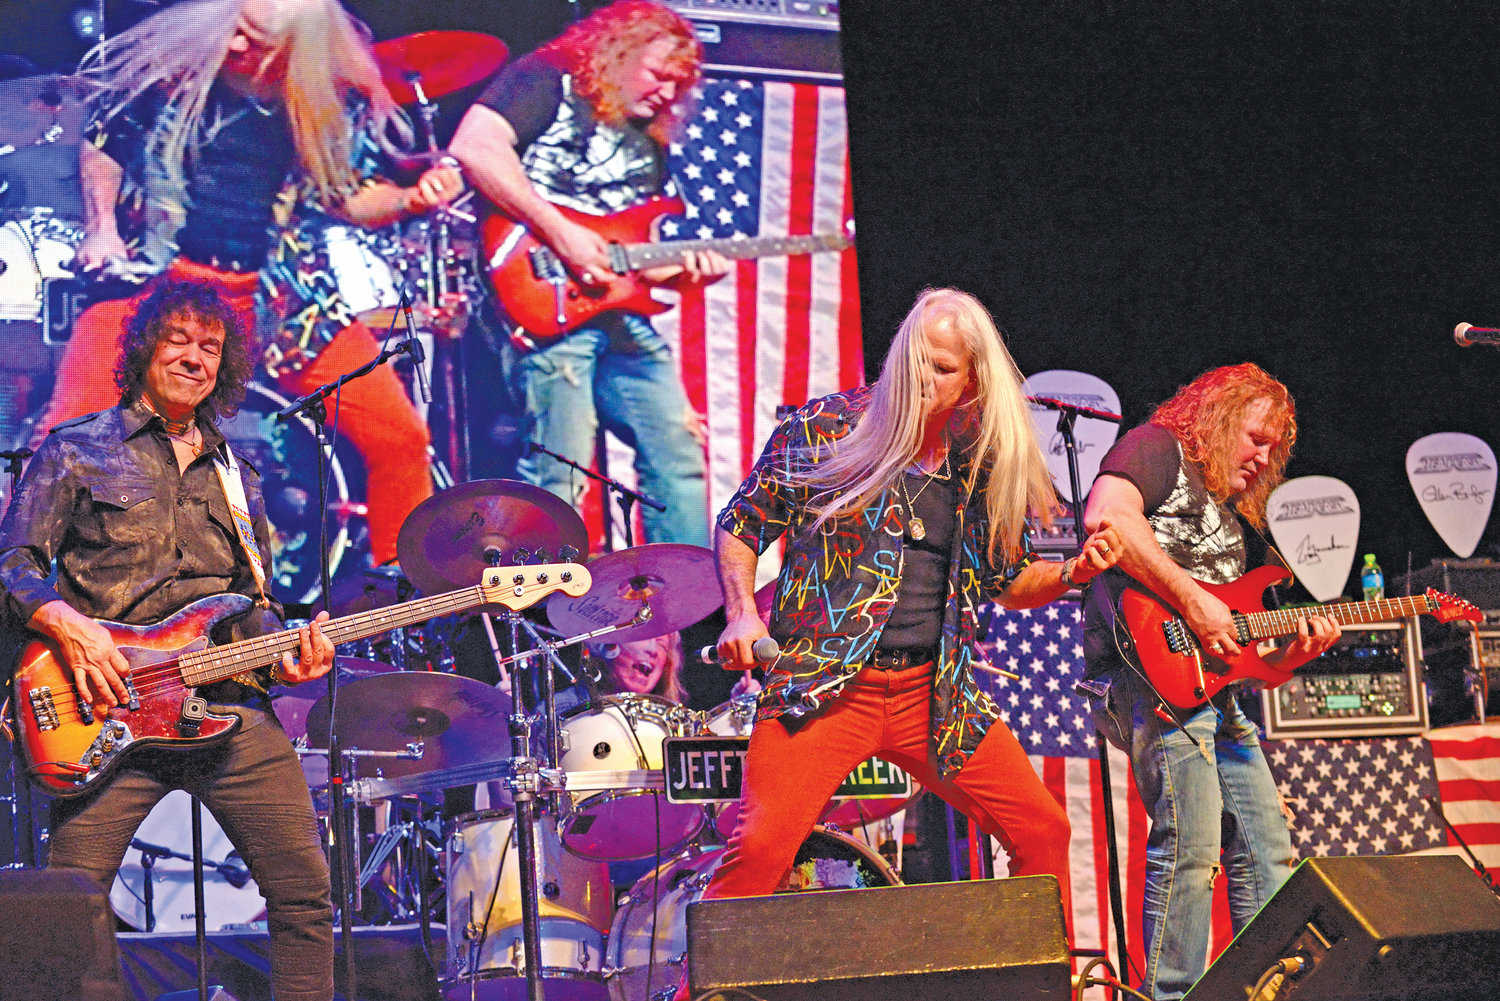 Classic rock band Head East headline this weekend at Classic Moonfest in Quilcene. The band is one of several performing who bring back the sounds of the 1970s.